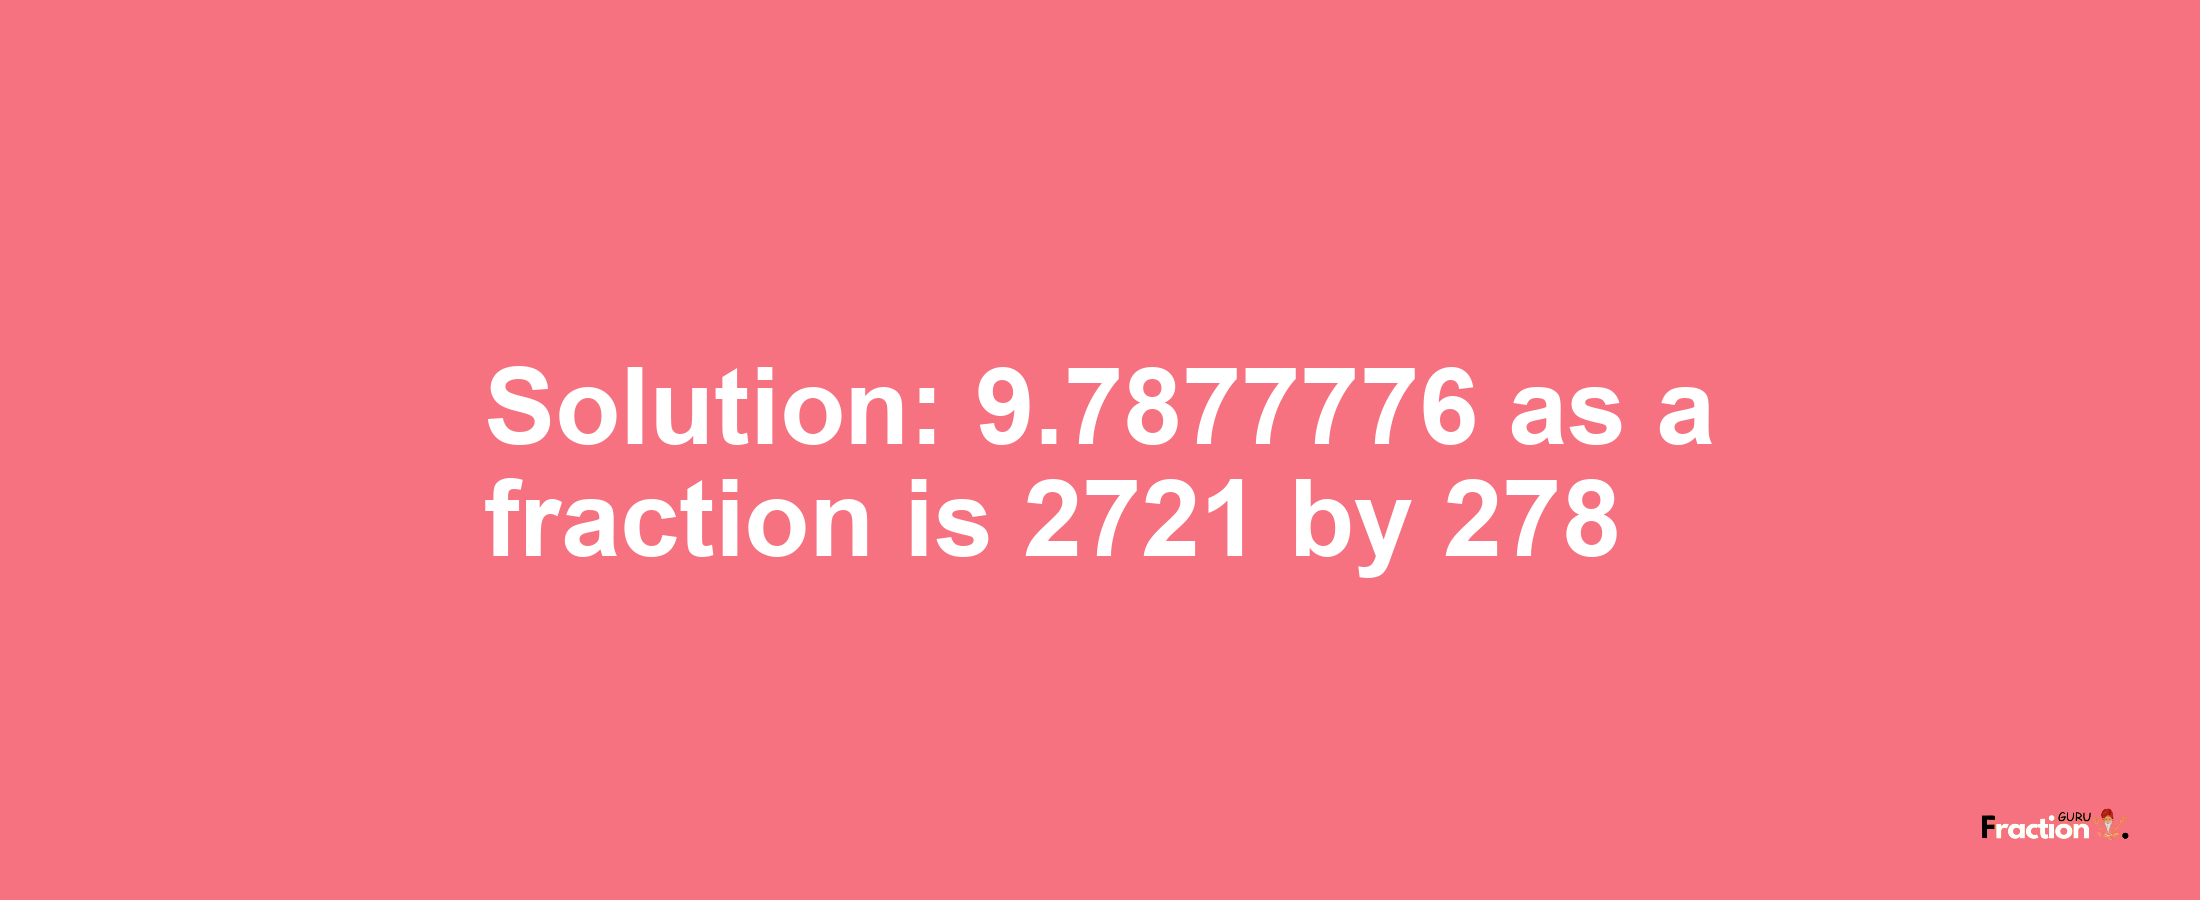 Solution:9.7877776 as a fraction is 2721/278